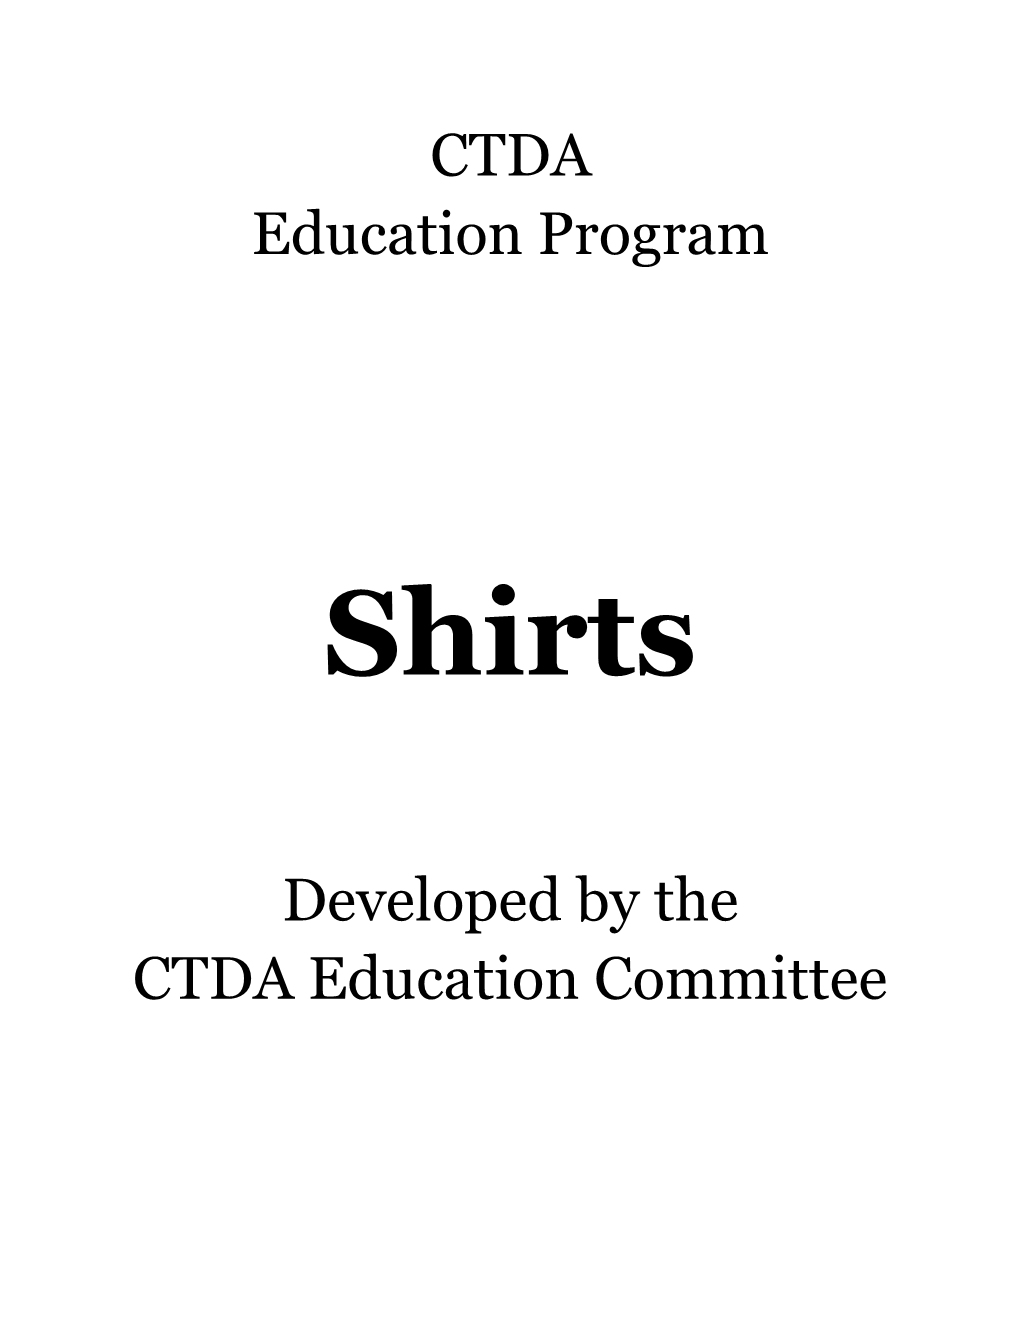 CTDA Education Program Developed by the CTDA Education Committee